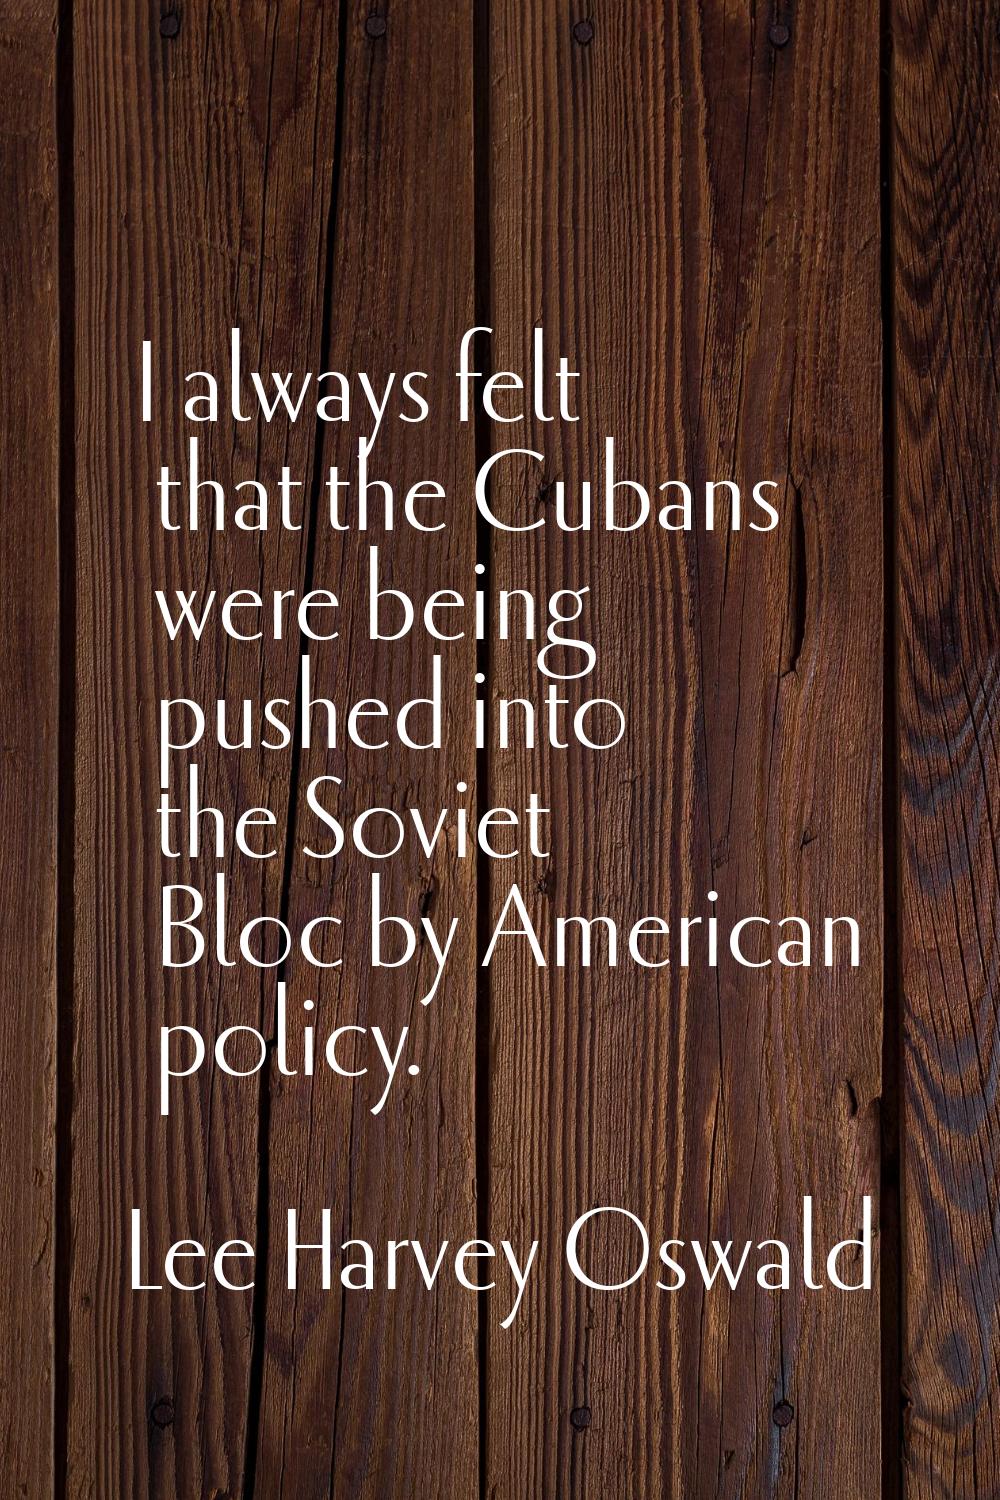 I always felt that the Cubans were being pushed into the Soviet Bloc by American policy.